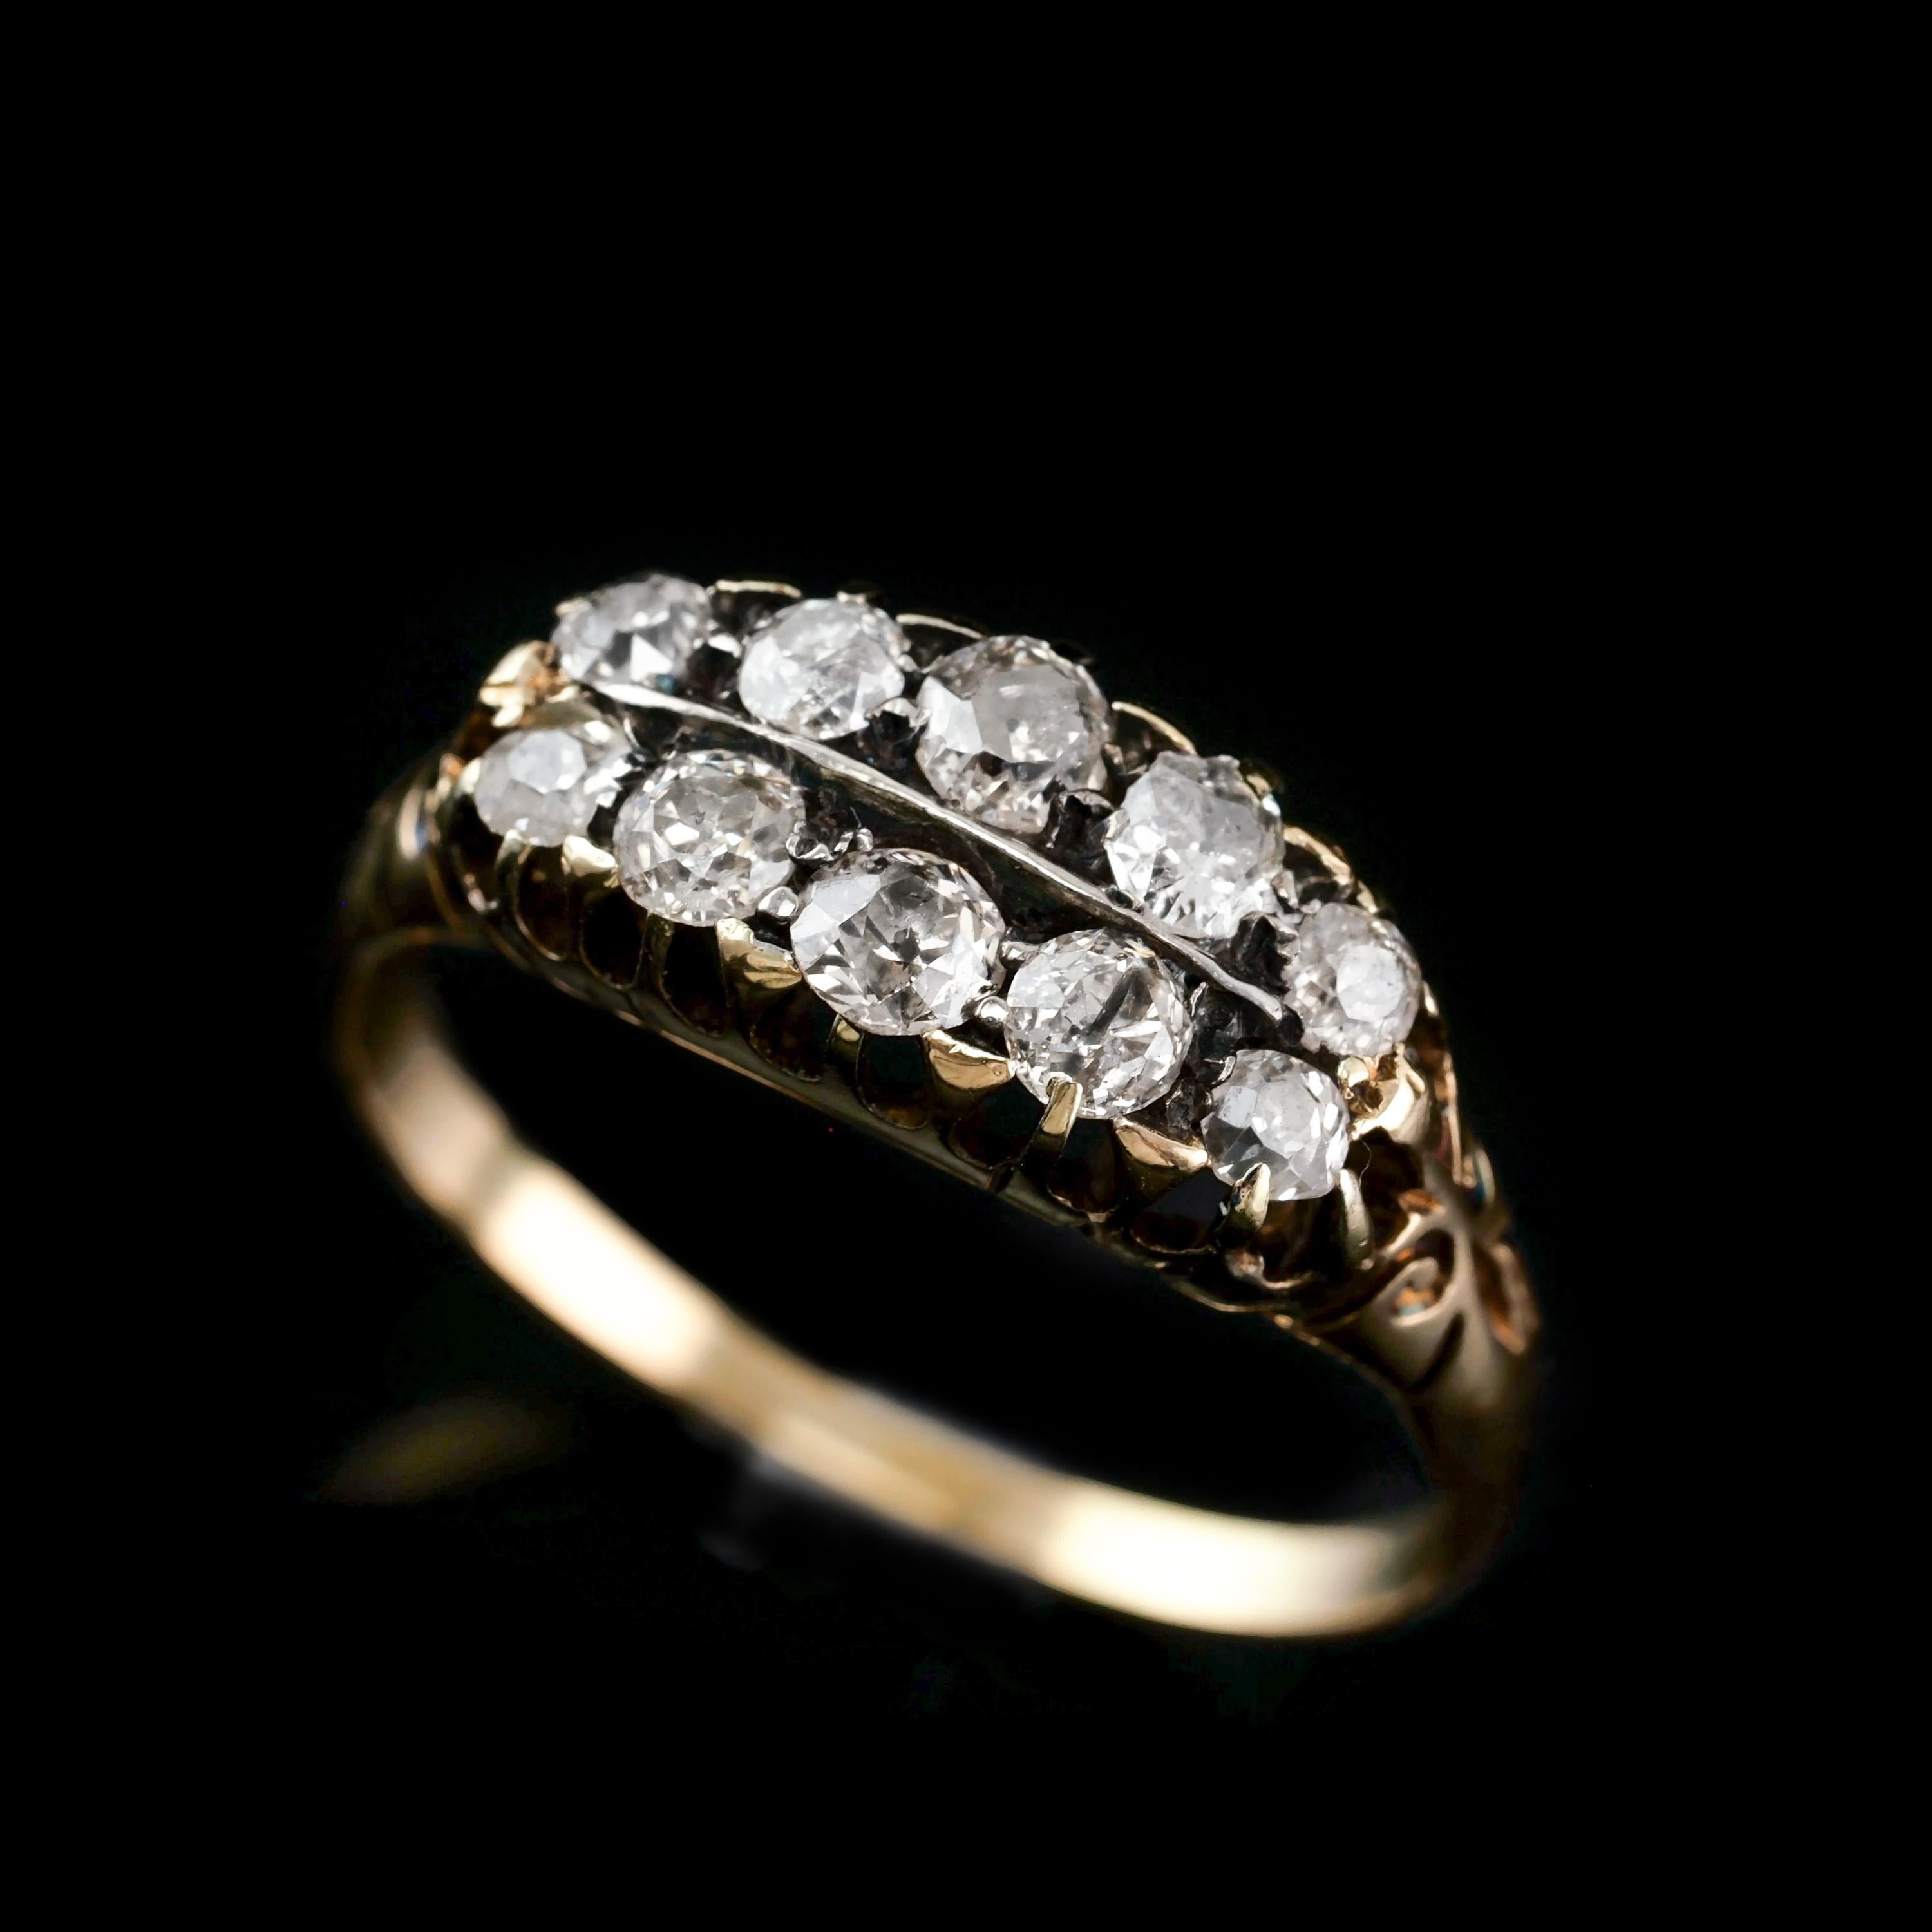 We are delighted to offer this fabulous Victorian 18K gold ring with a dual row of antique old cut diamonds made c.1890.
   
Distinctly Victorian and distinguished from contemporary pieces, 10 diamonds (approx 0.7 carat total) are set in two rows